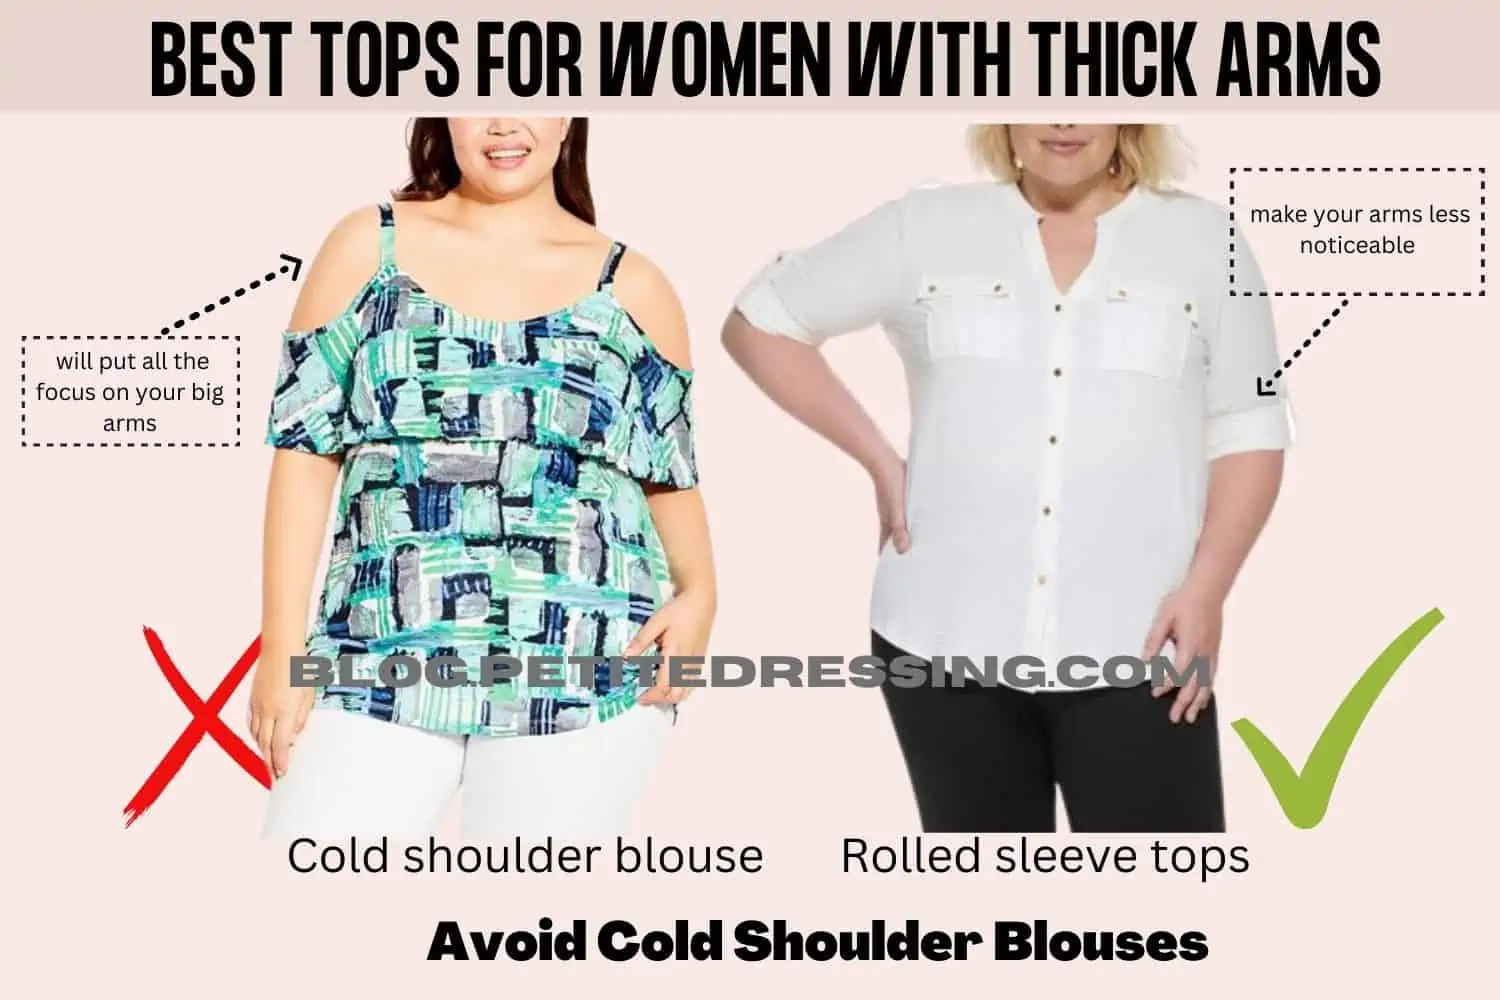 Summer Tops for Women Sexy Cold Shoulder Plus Size Tops Casual Solid Round  Neck T Shirts